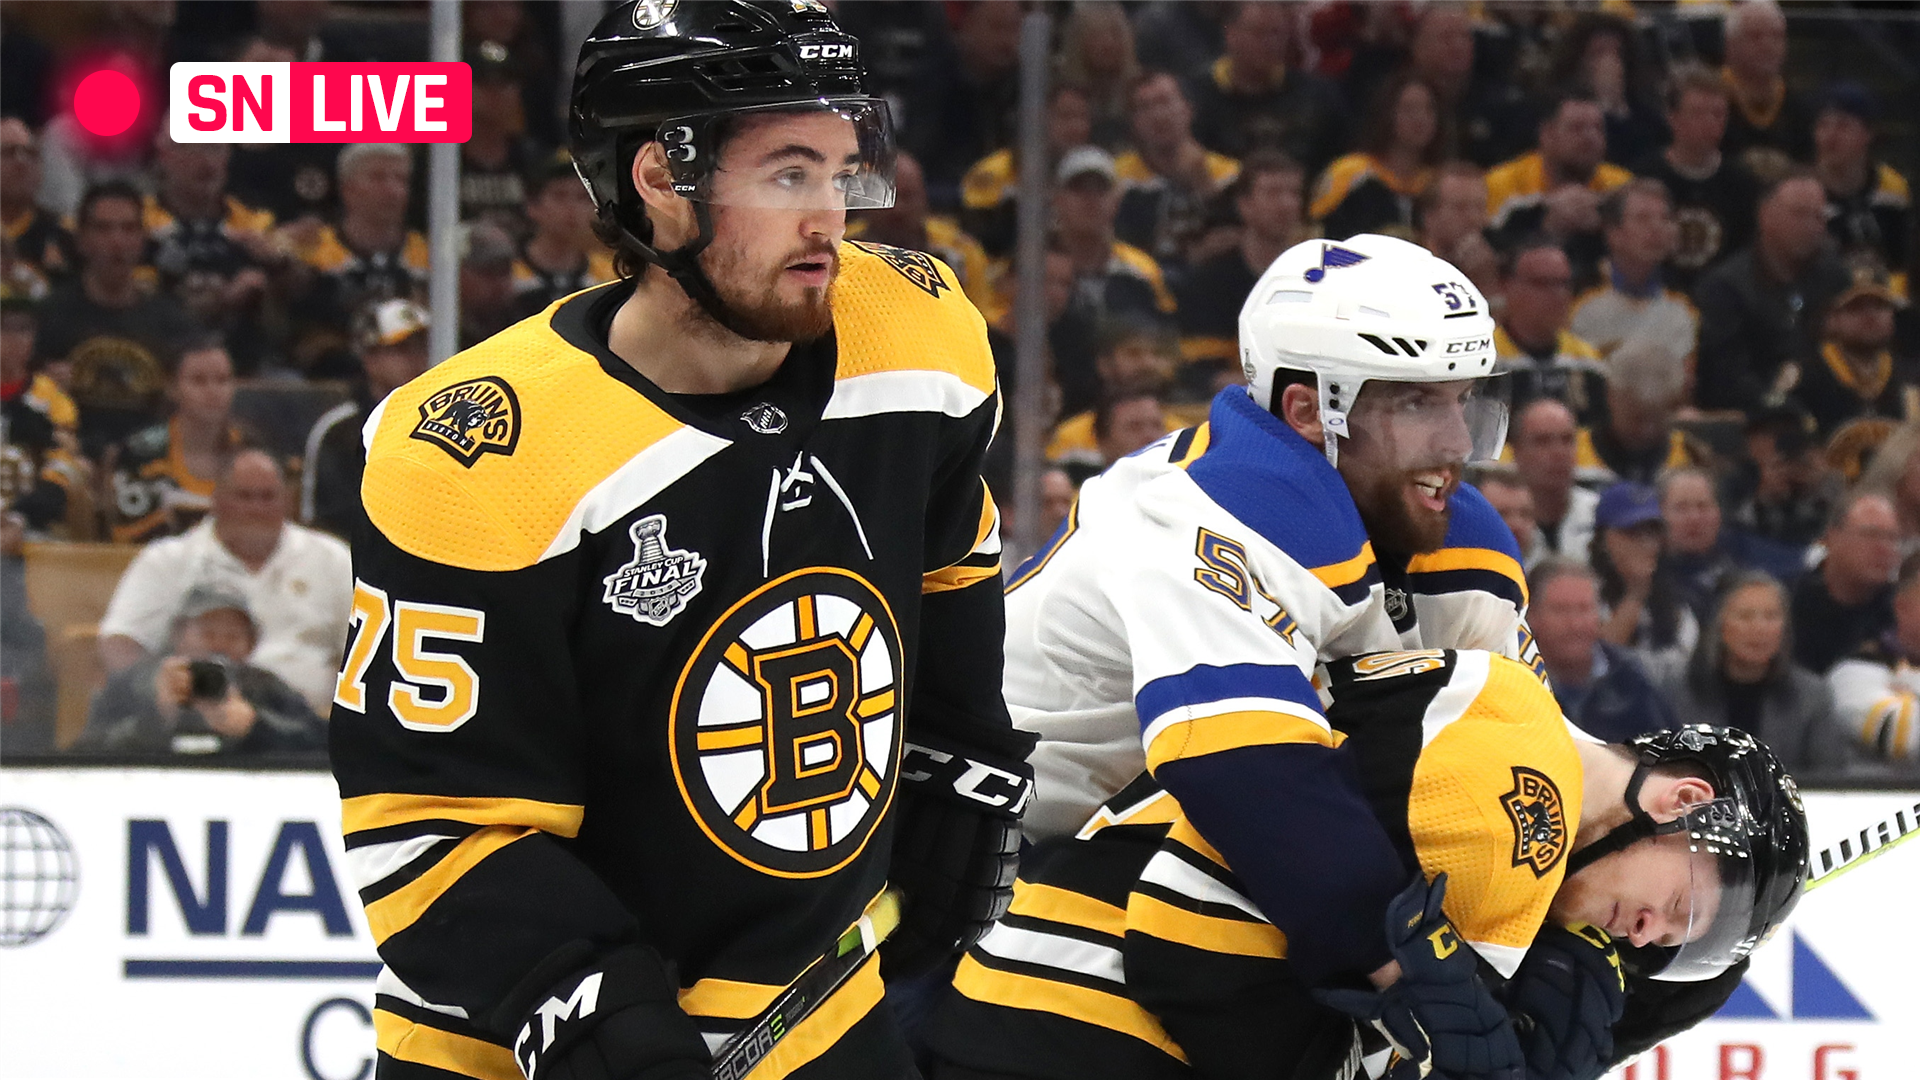 Blues vs. Bruins Live score, updates and highlights from Game 2 of the